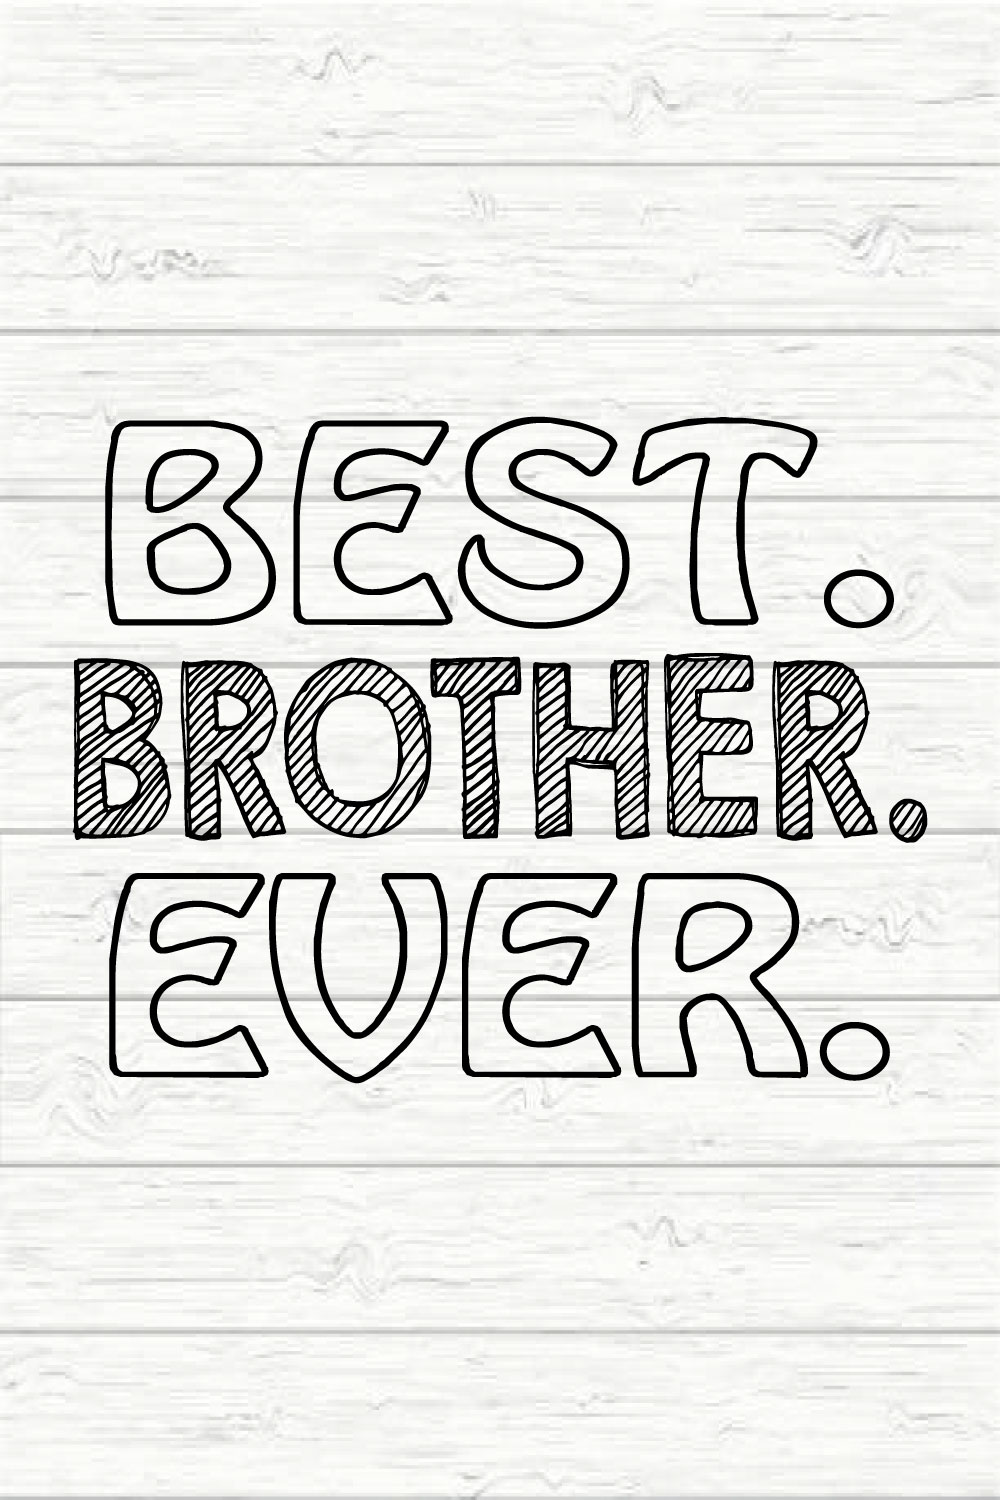 Best brother ever pinterest preview image.